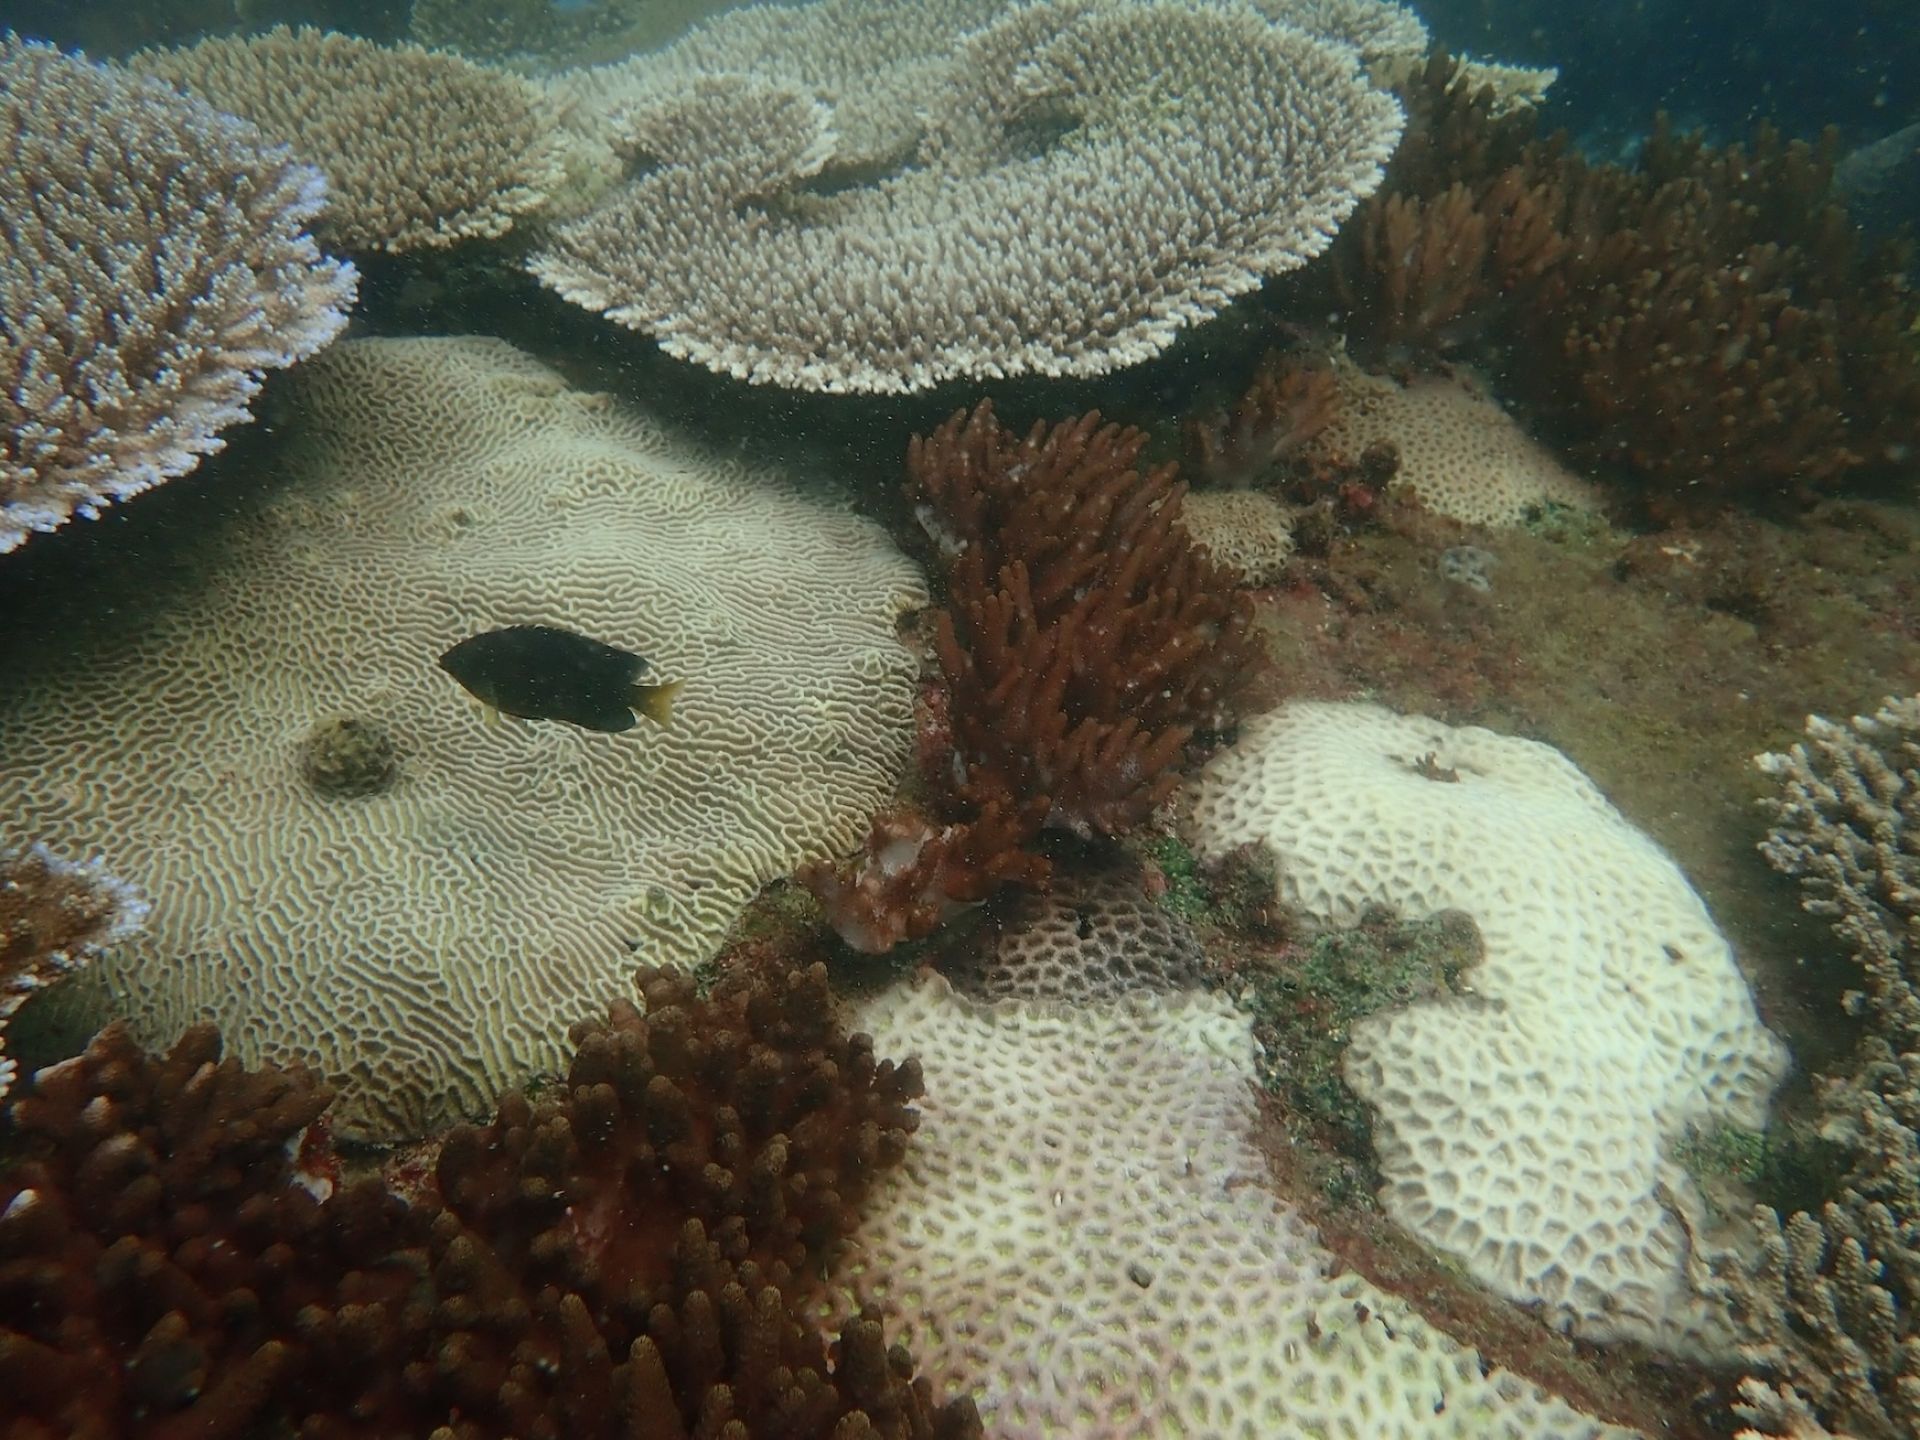 The JCU team surveyed 27 sites at the Keppel Islands, with most sites showing signs of bleaching, and only deeper areas of reefs relatively unimpacted by heat stress. PICTURE: TropWATER/JCU